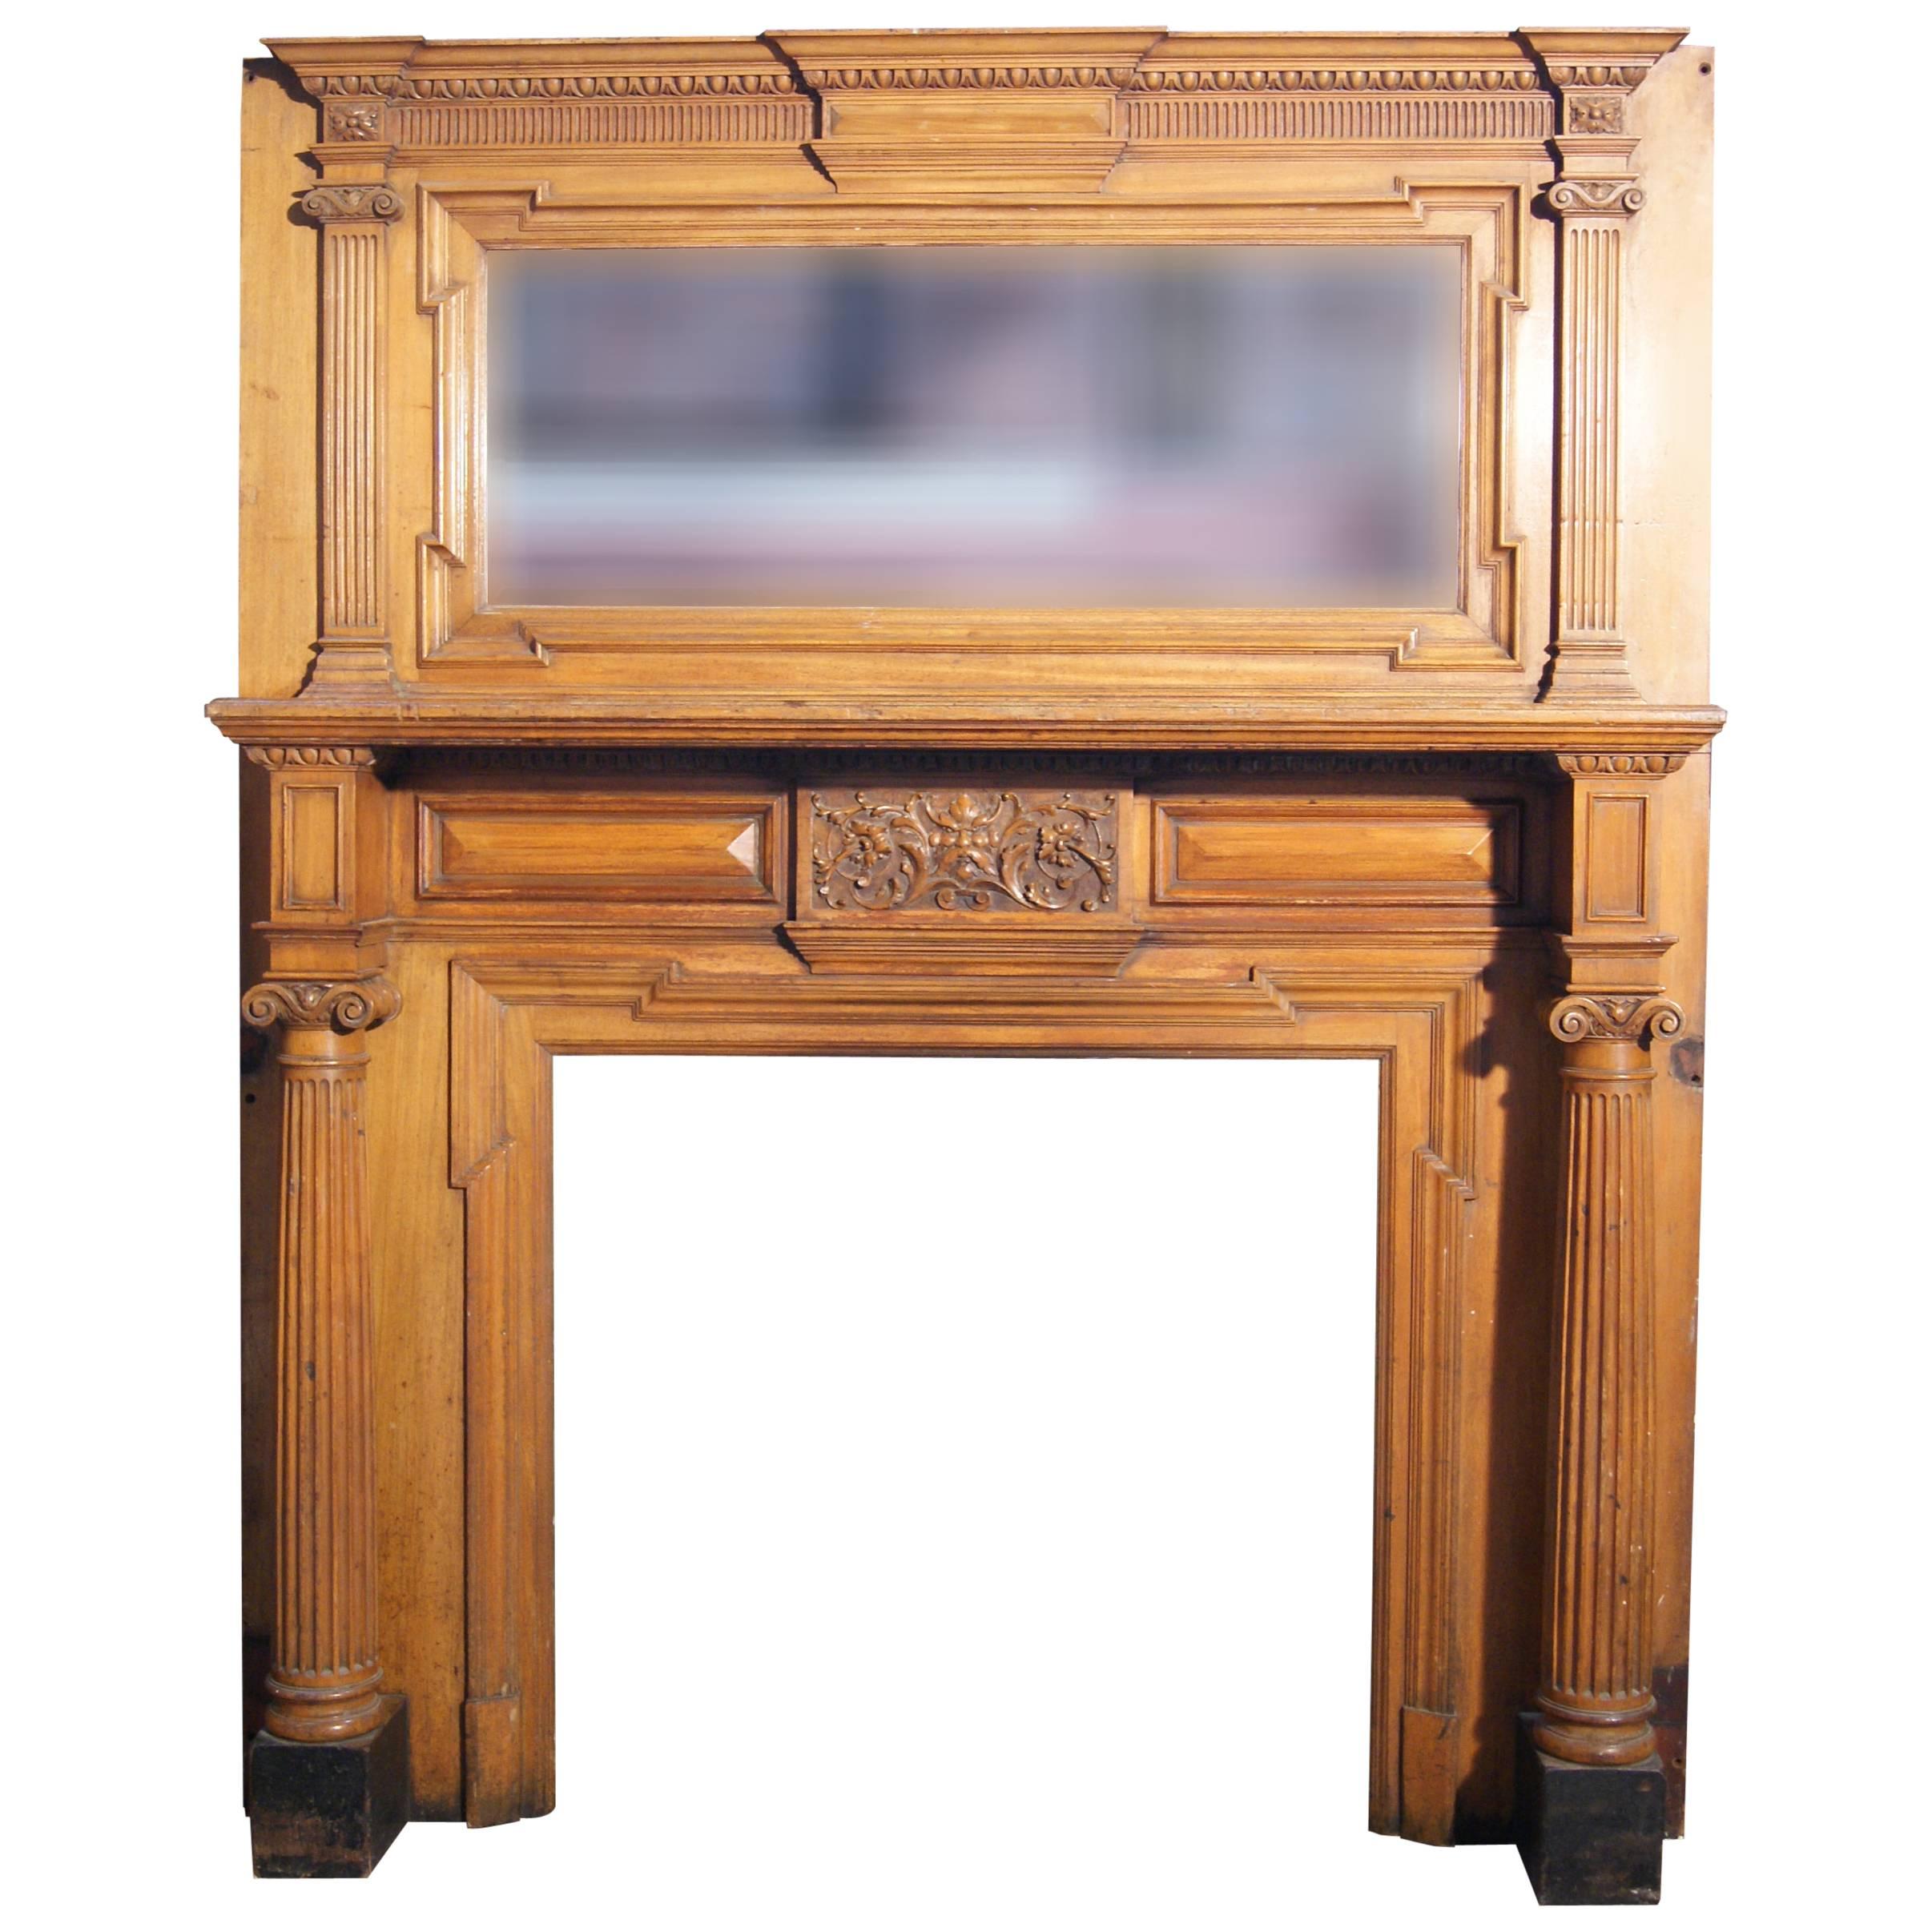 Large Carved Walnut Fire Surround, circa 1880